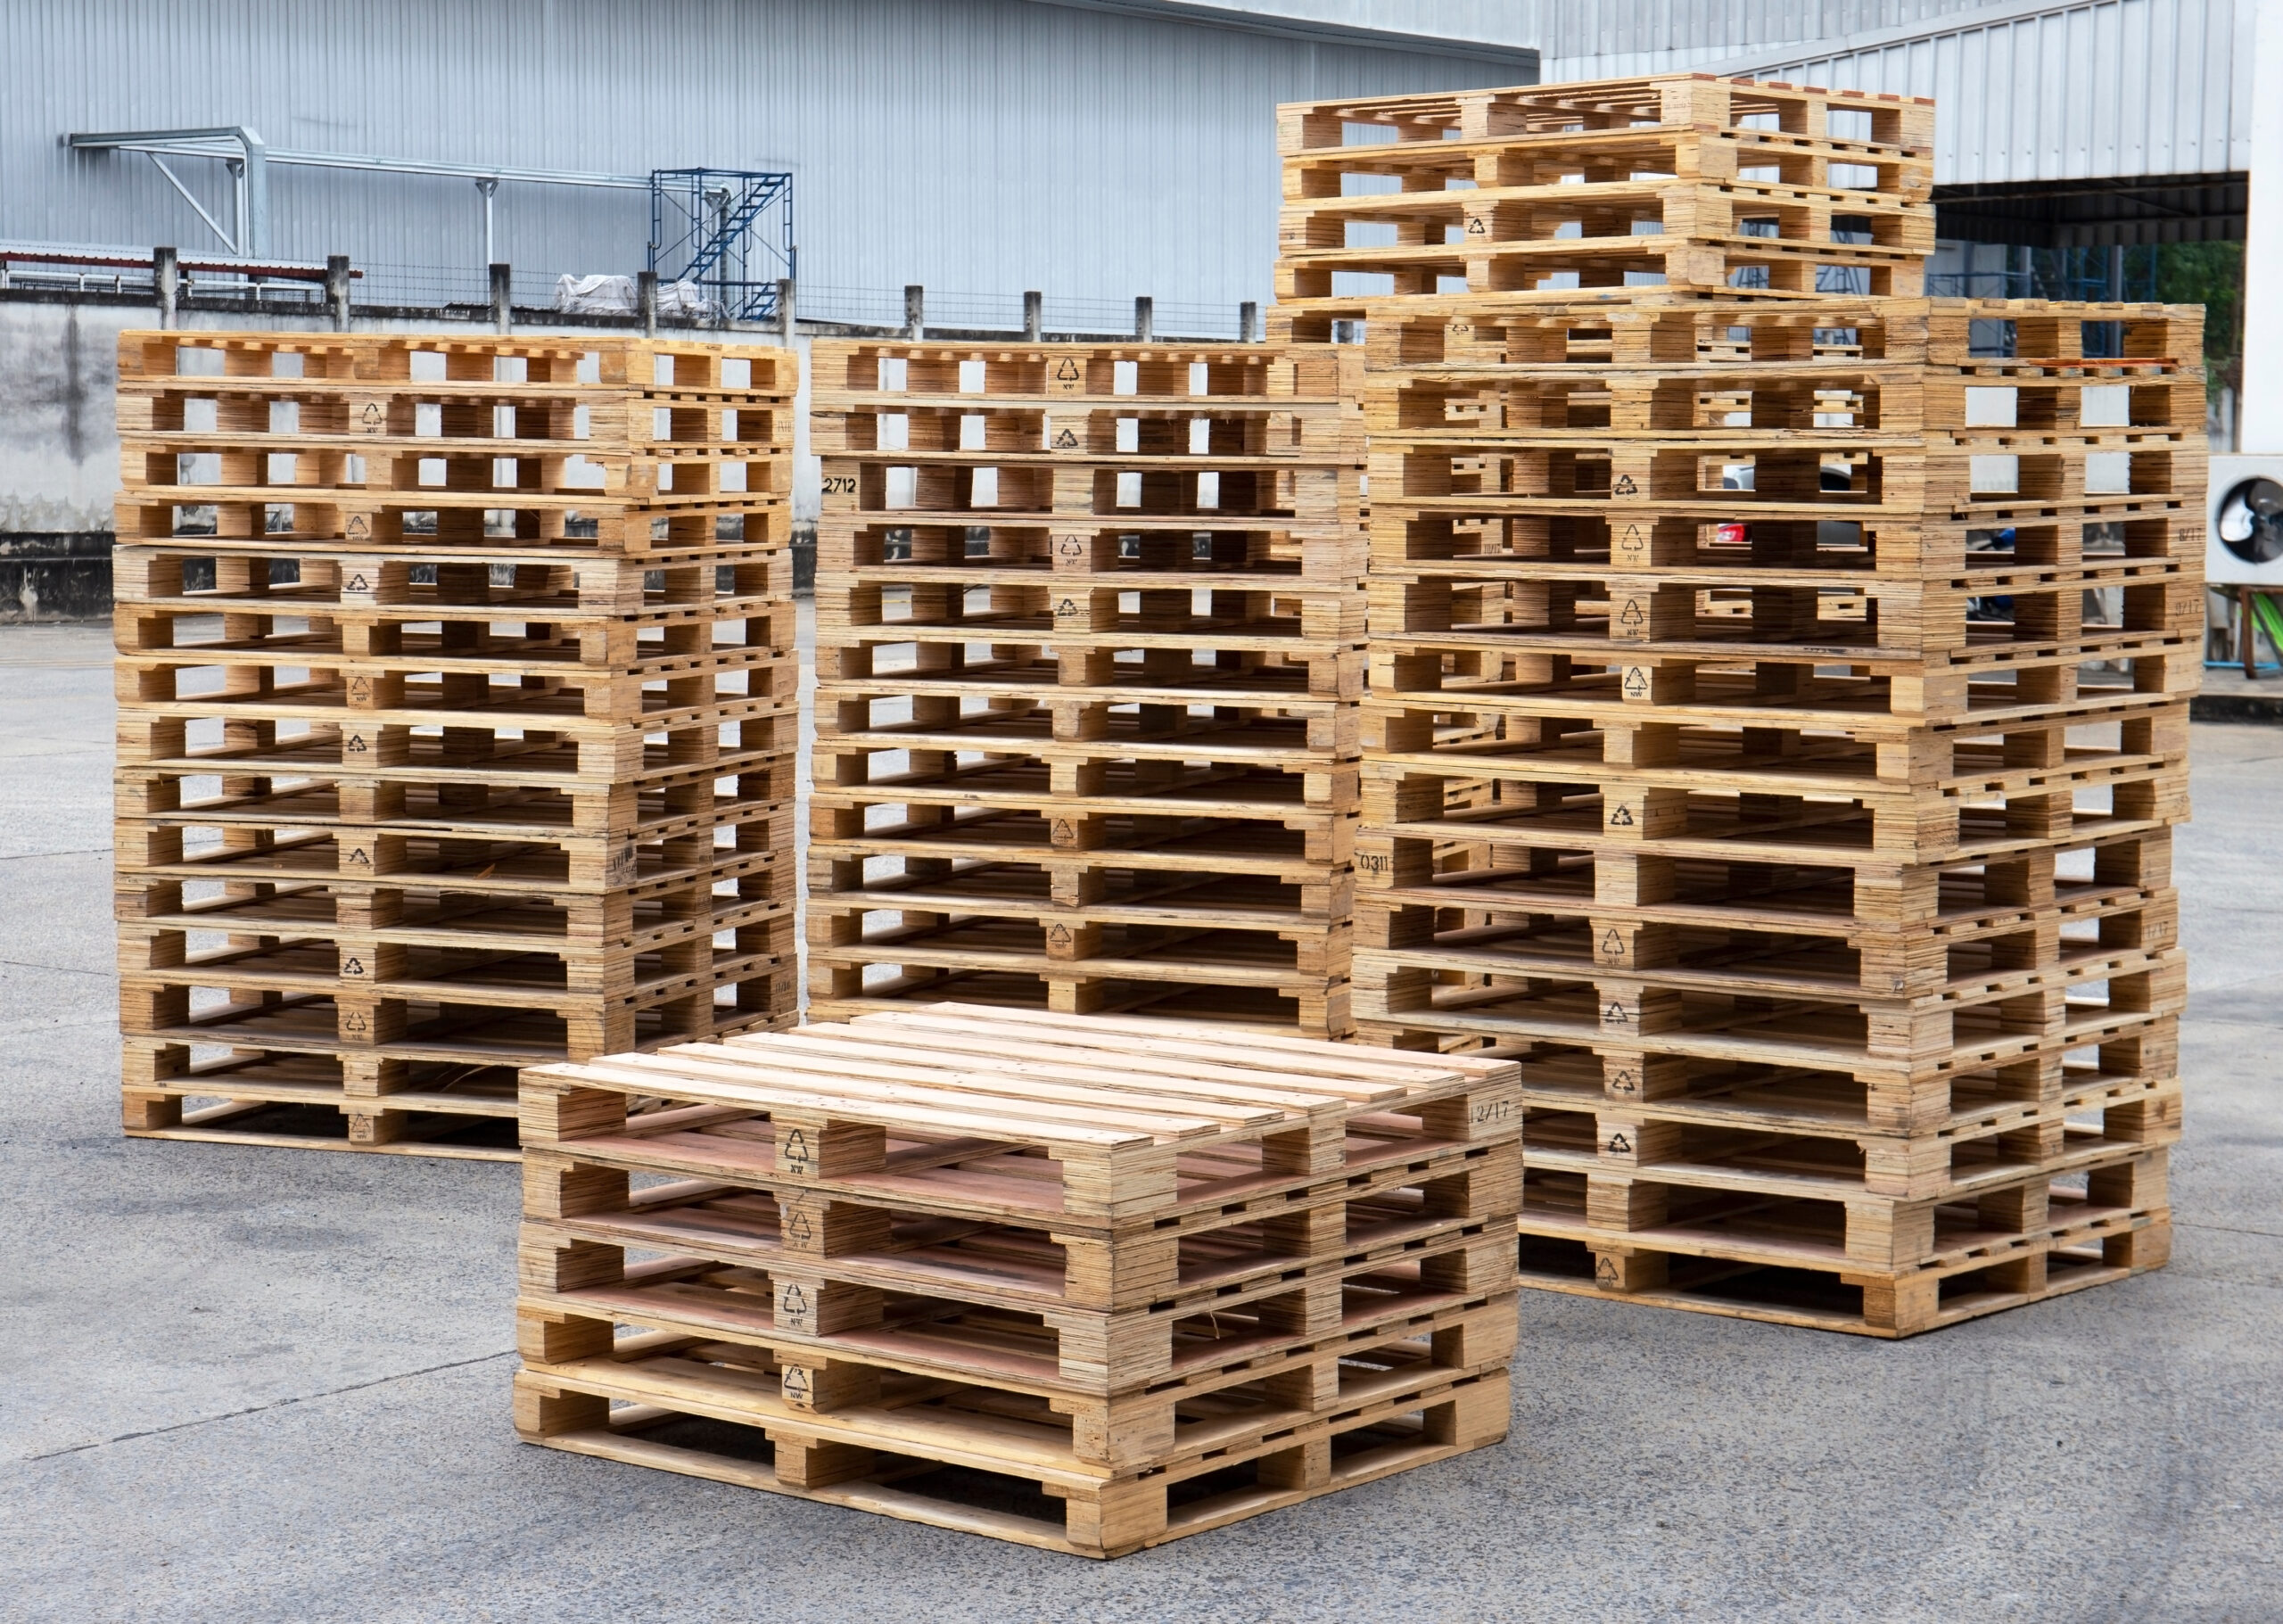 A group of stacked wooden pallets in an industrial warehouse that values pallet maintenance and looks out for signs of mold.